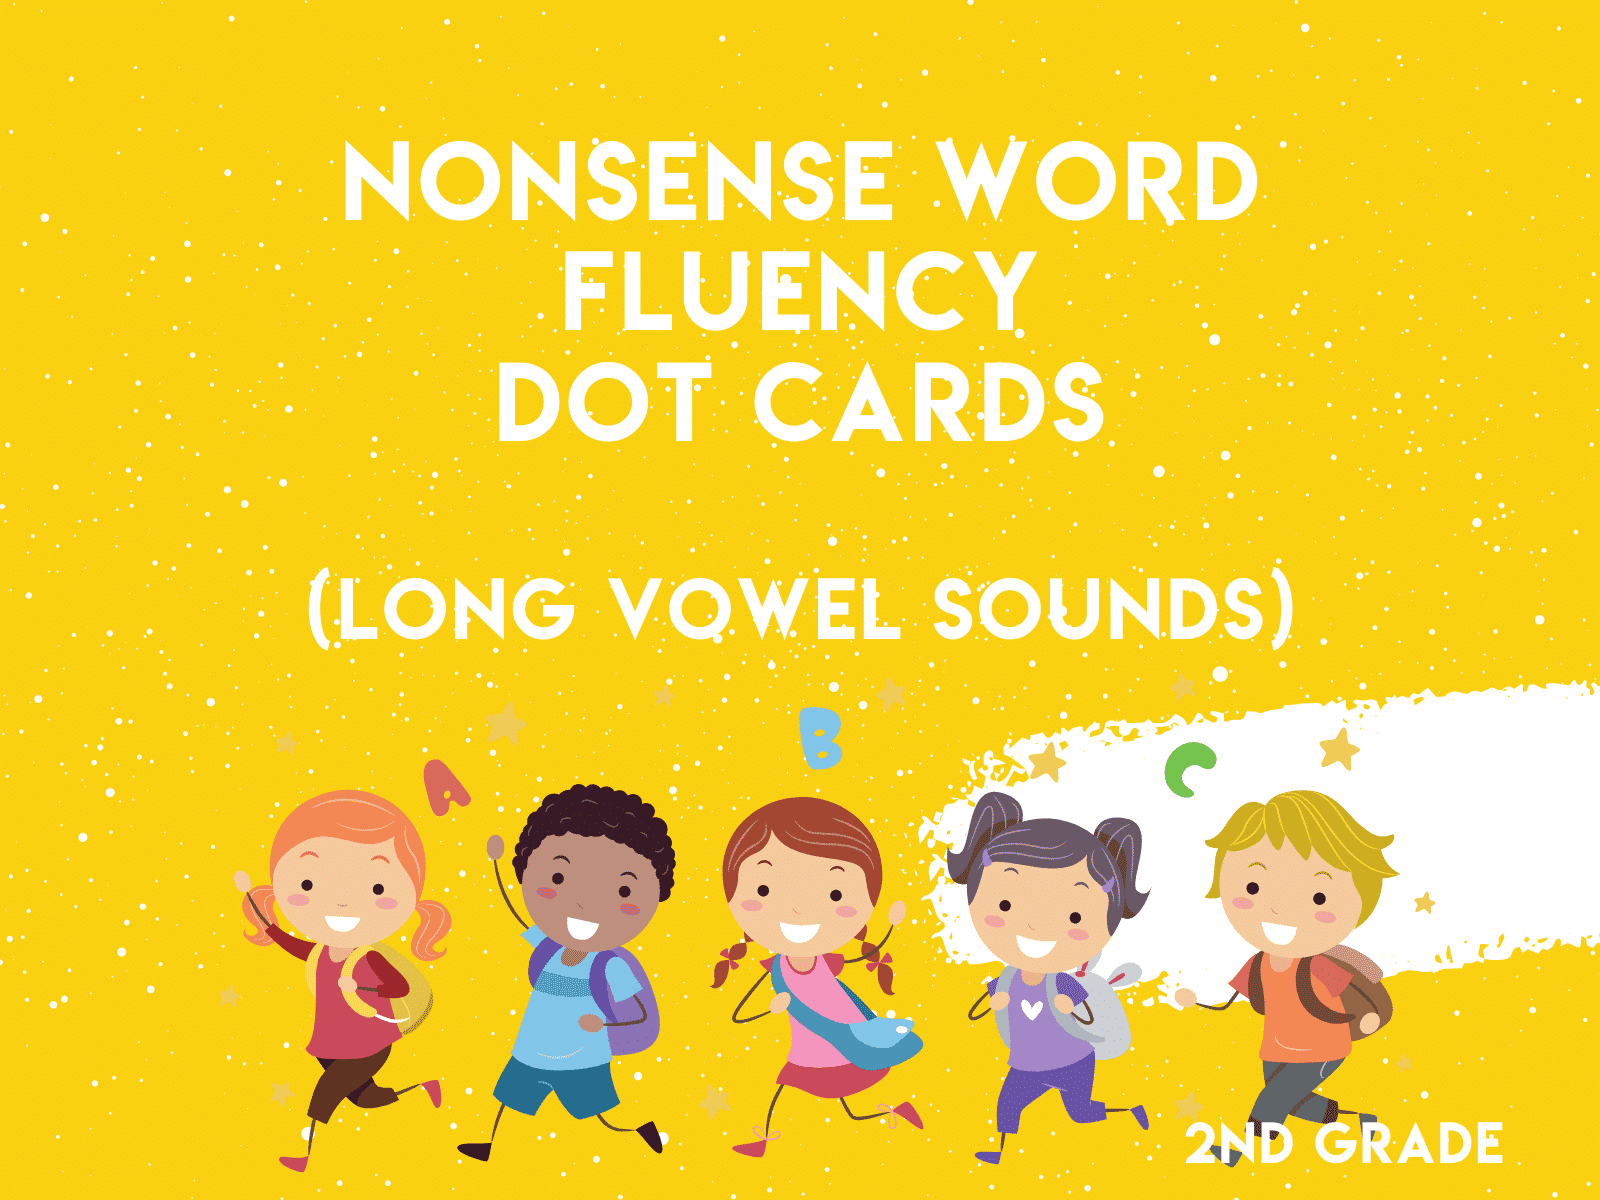 Try these nonsense word dot cards to help your second grade reading students improve decoding skills.